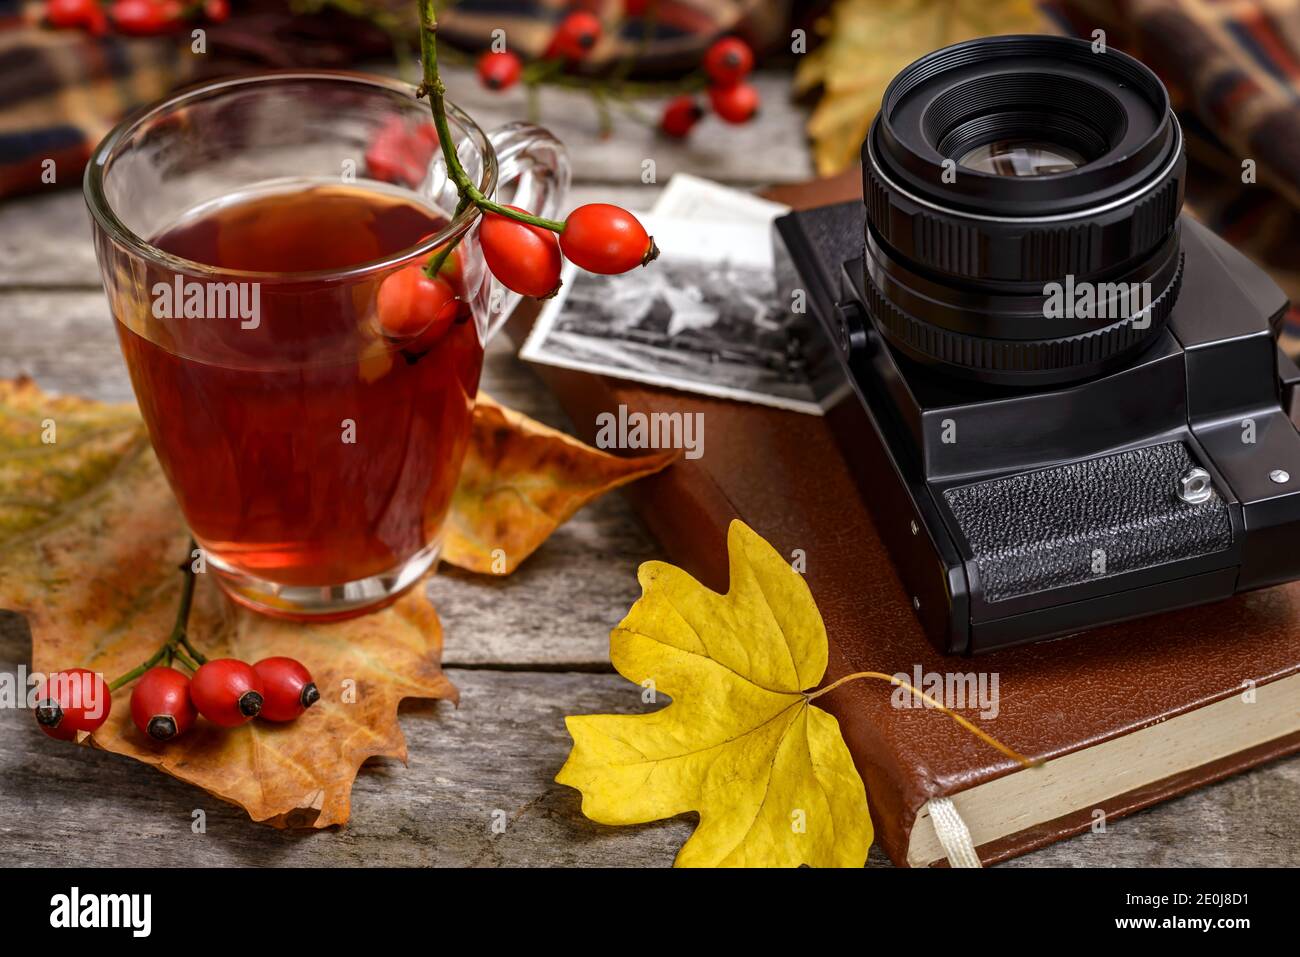 A cup of rose hip tea with fresh rose hips, vintage camera, old photographs, book and autumn leaves on wooden table. Autumn concept, selective focus. Stock Photo